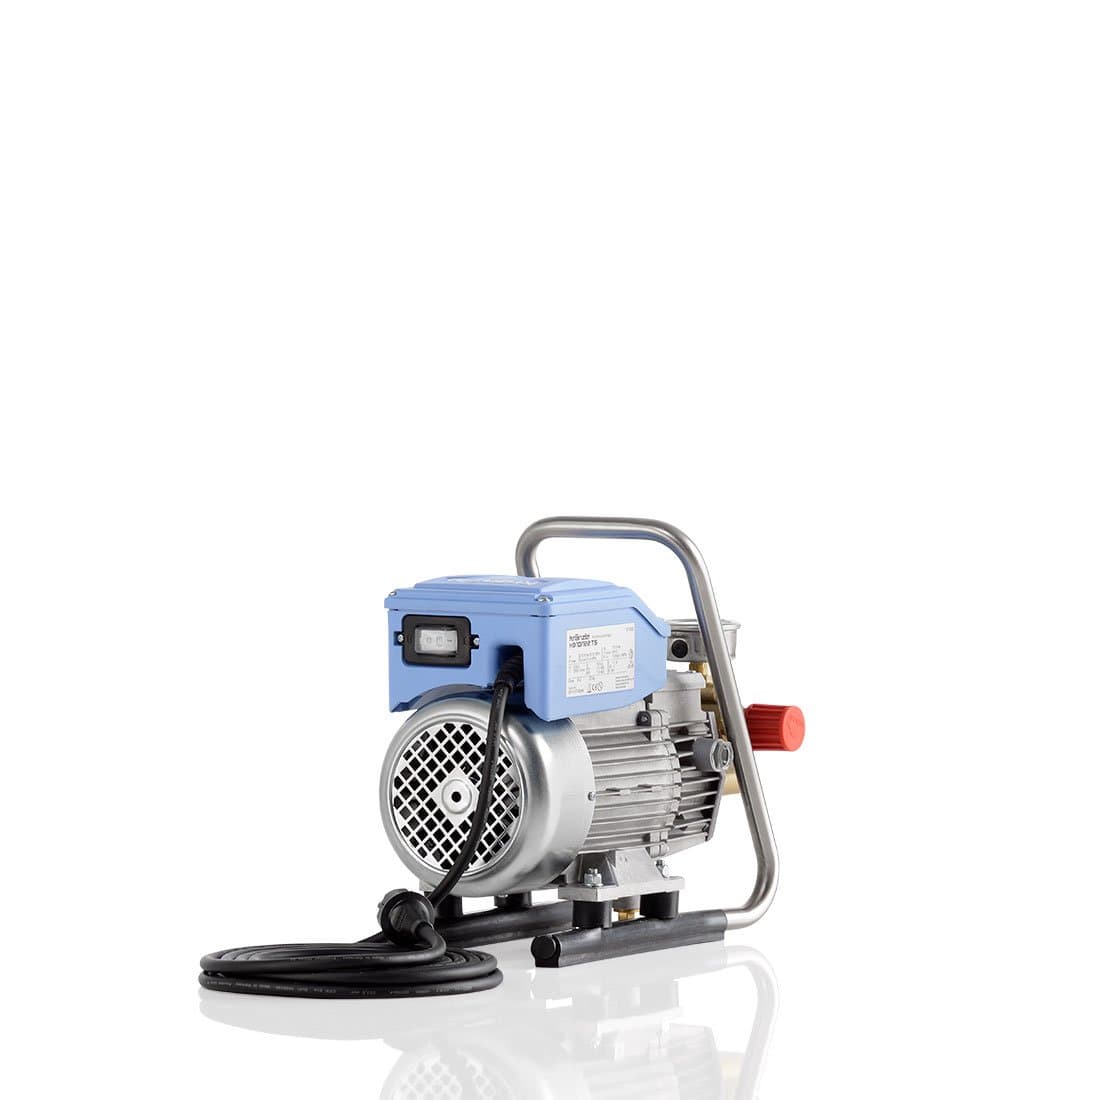 Kranzle K10/122 TS pressure washer with Quick Release and Total Stop - Just Car Care 